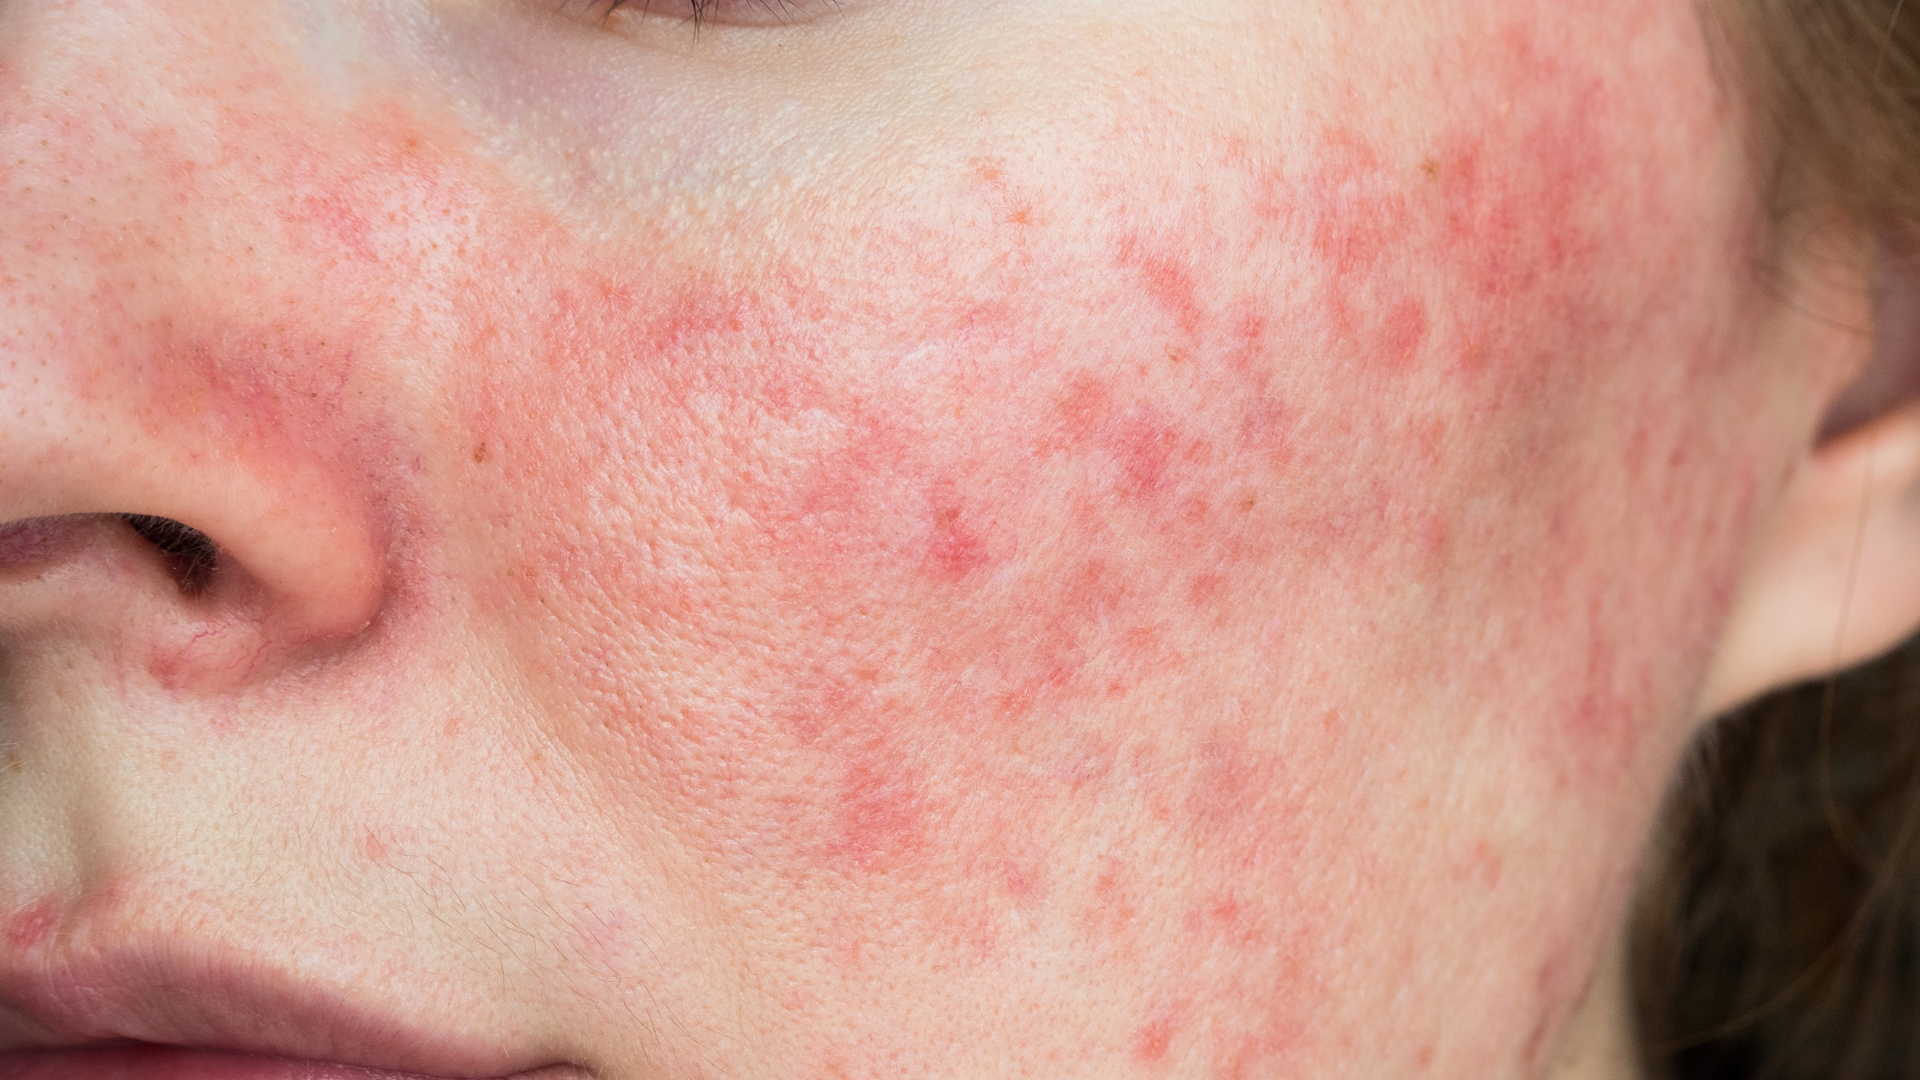 6 Redhead-Friendly Tips for Treating Rosacea